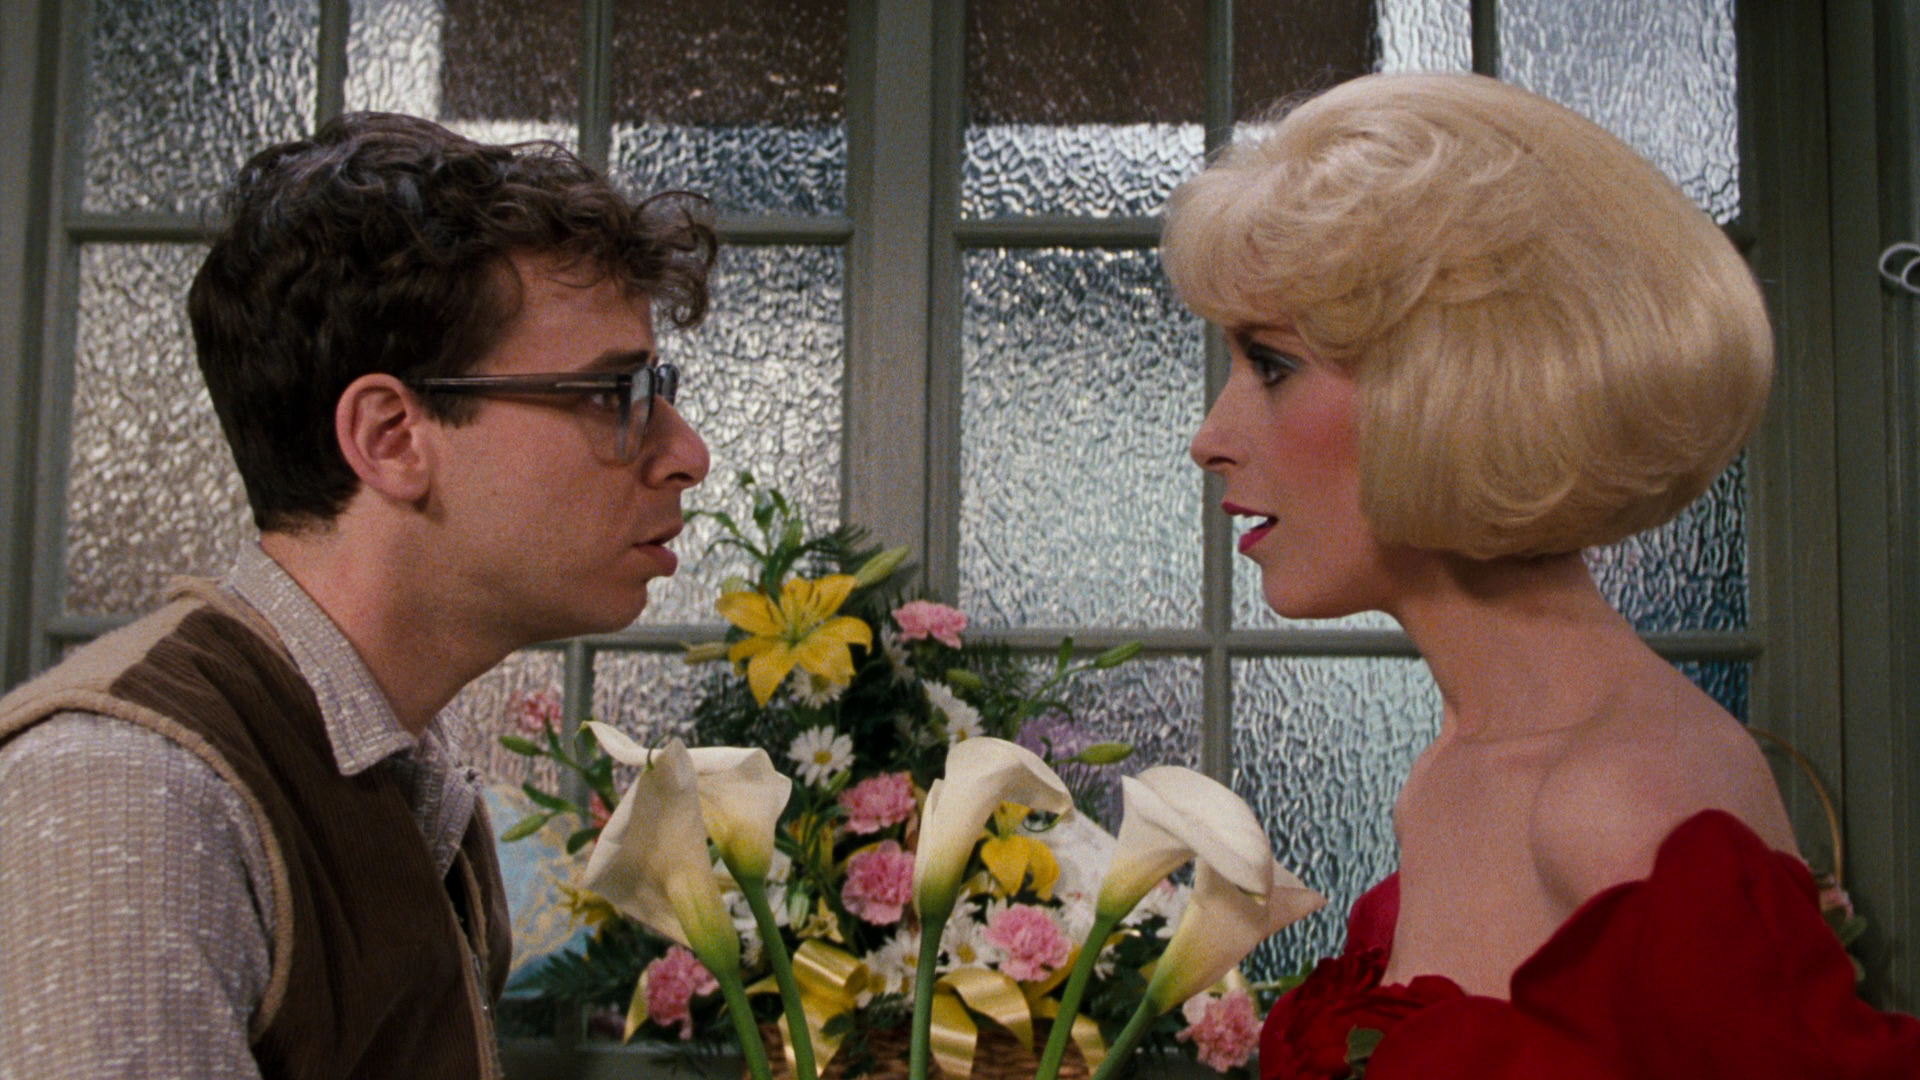 9 25 Things You Never Knew About Little Shop of Horrors